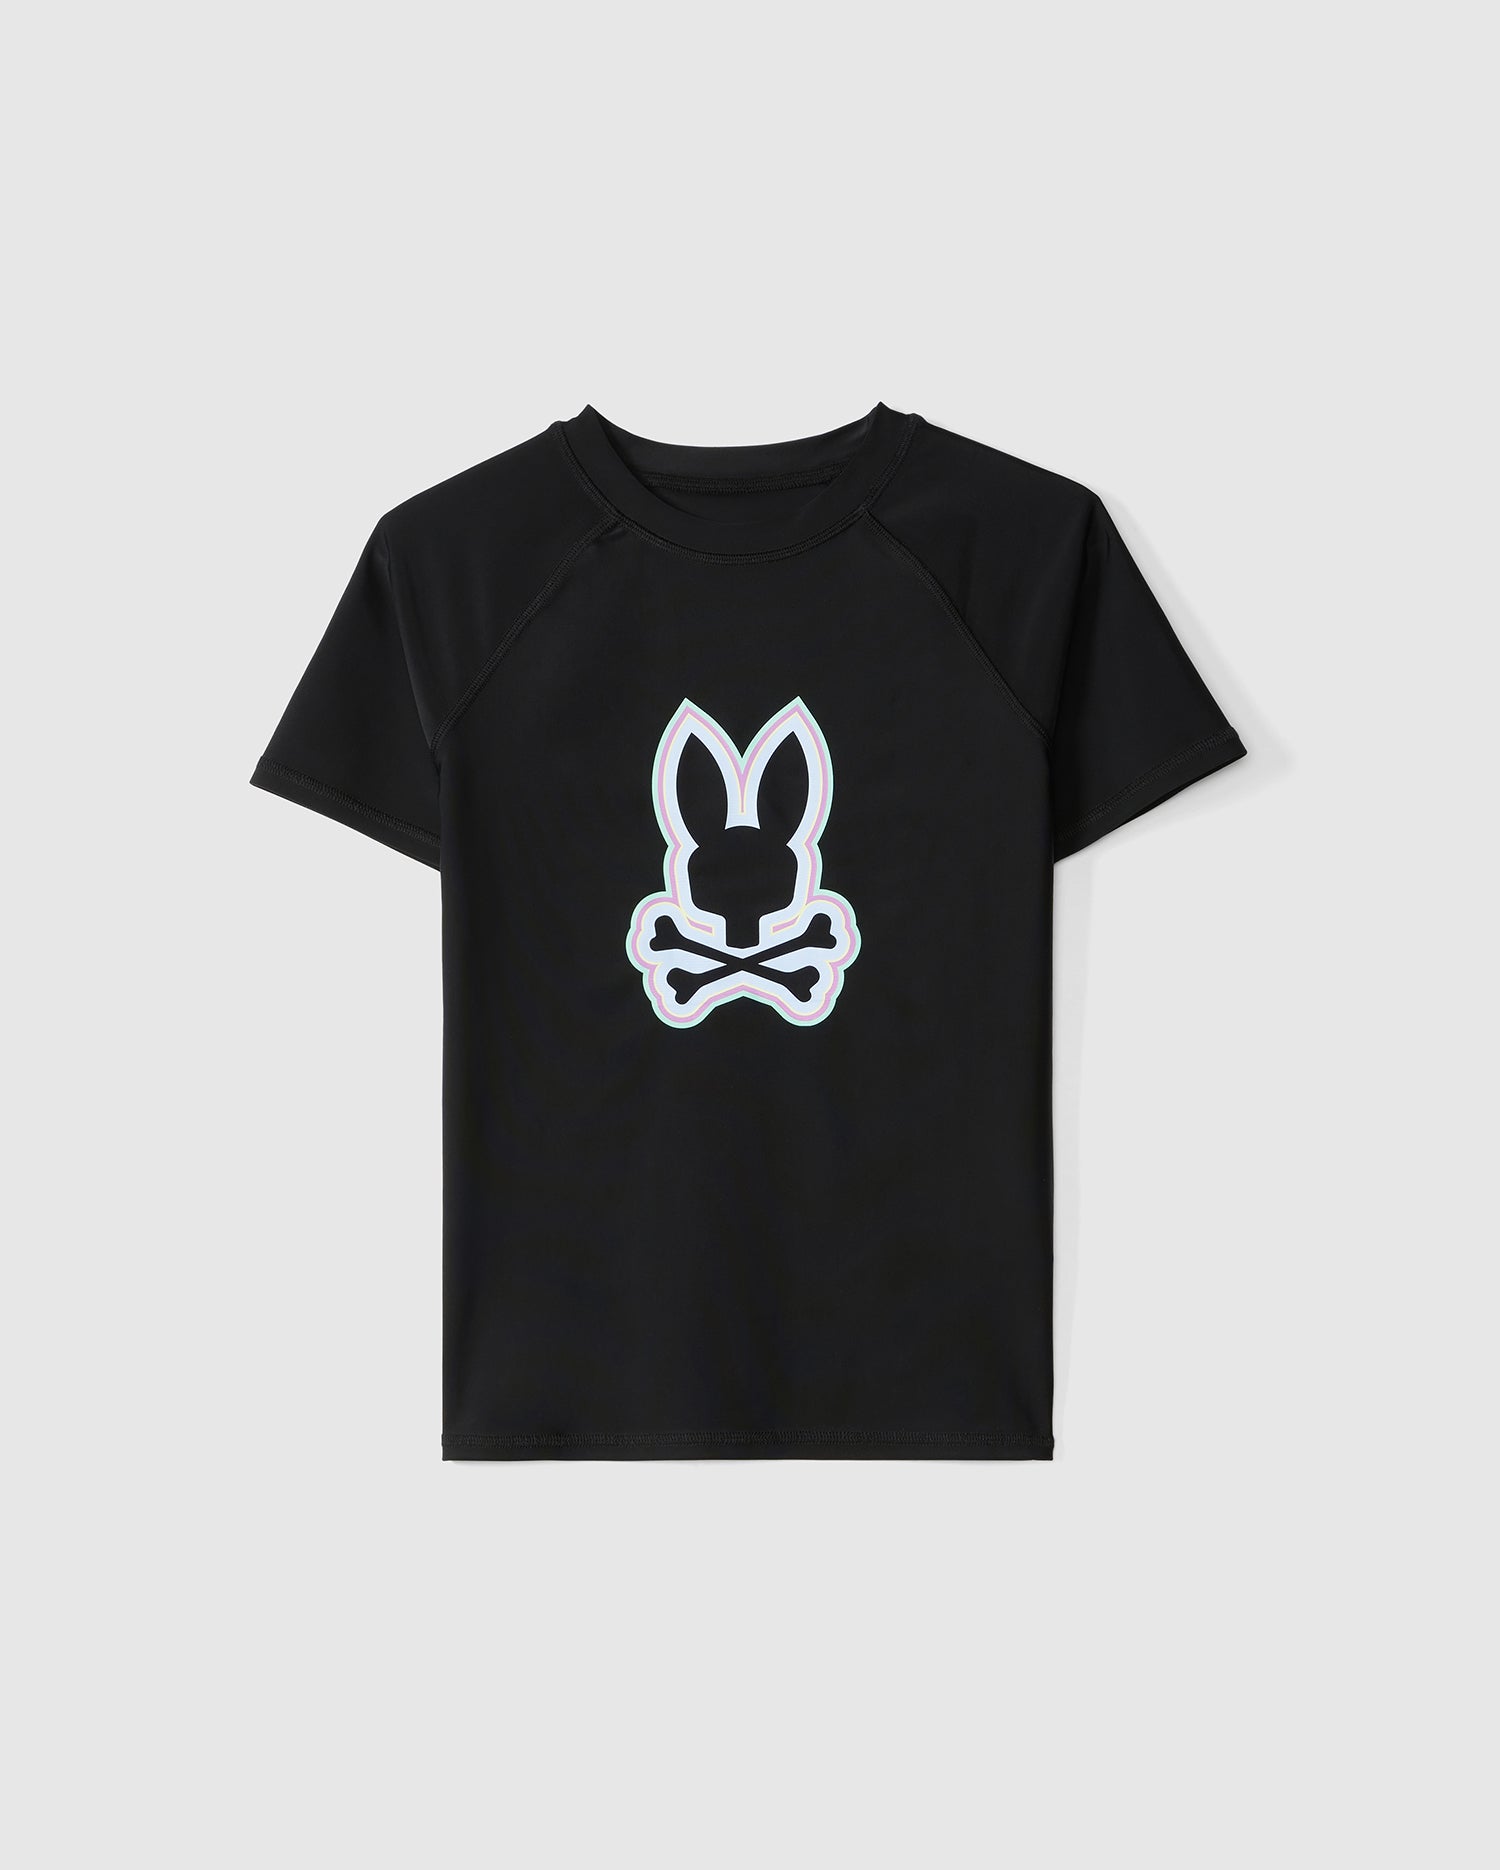 A black short sleeve rash guard with a white graphic design of a stylized bunny wearing a bow tie, displayed on a plain white background, featuring UPF 50+ protection -- KIDS SAN LEON ANTI-UV RASHGUARD by Psycho Bunny